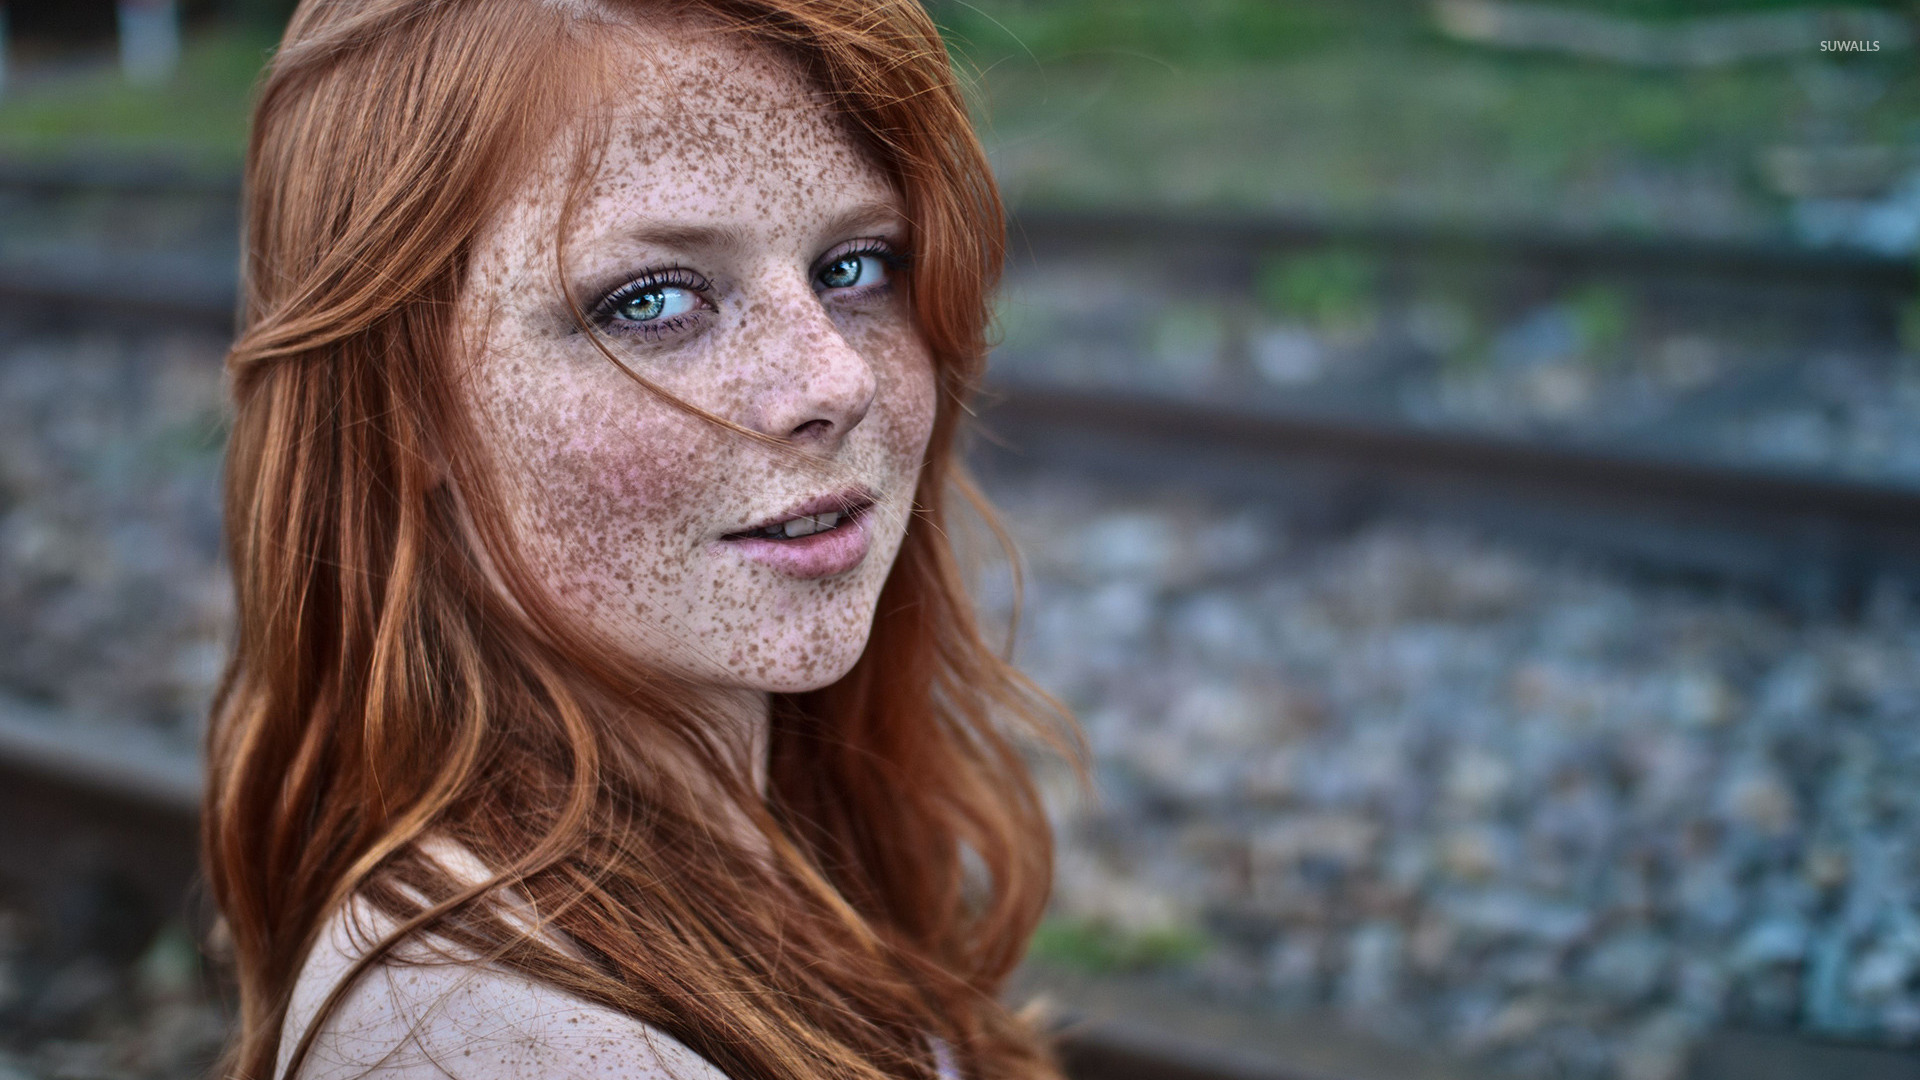 Freckled redhead wallpaper.